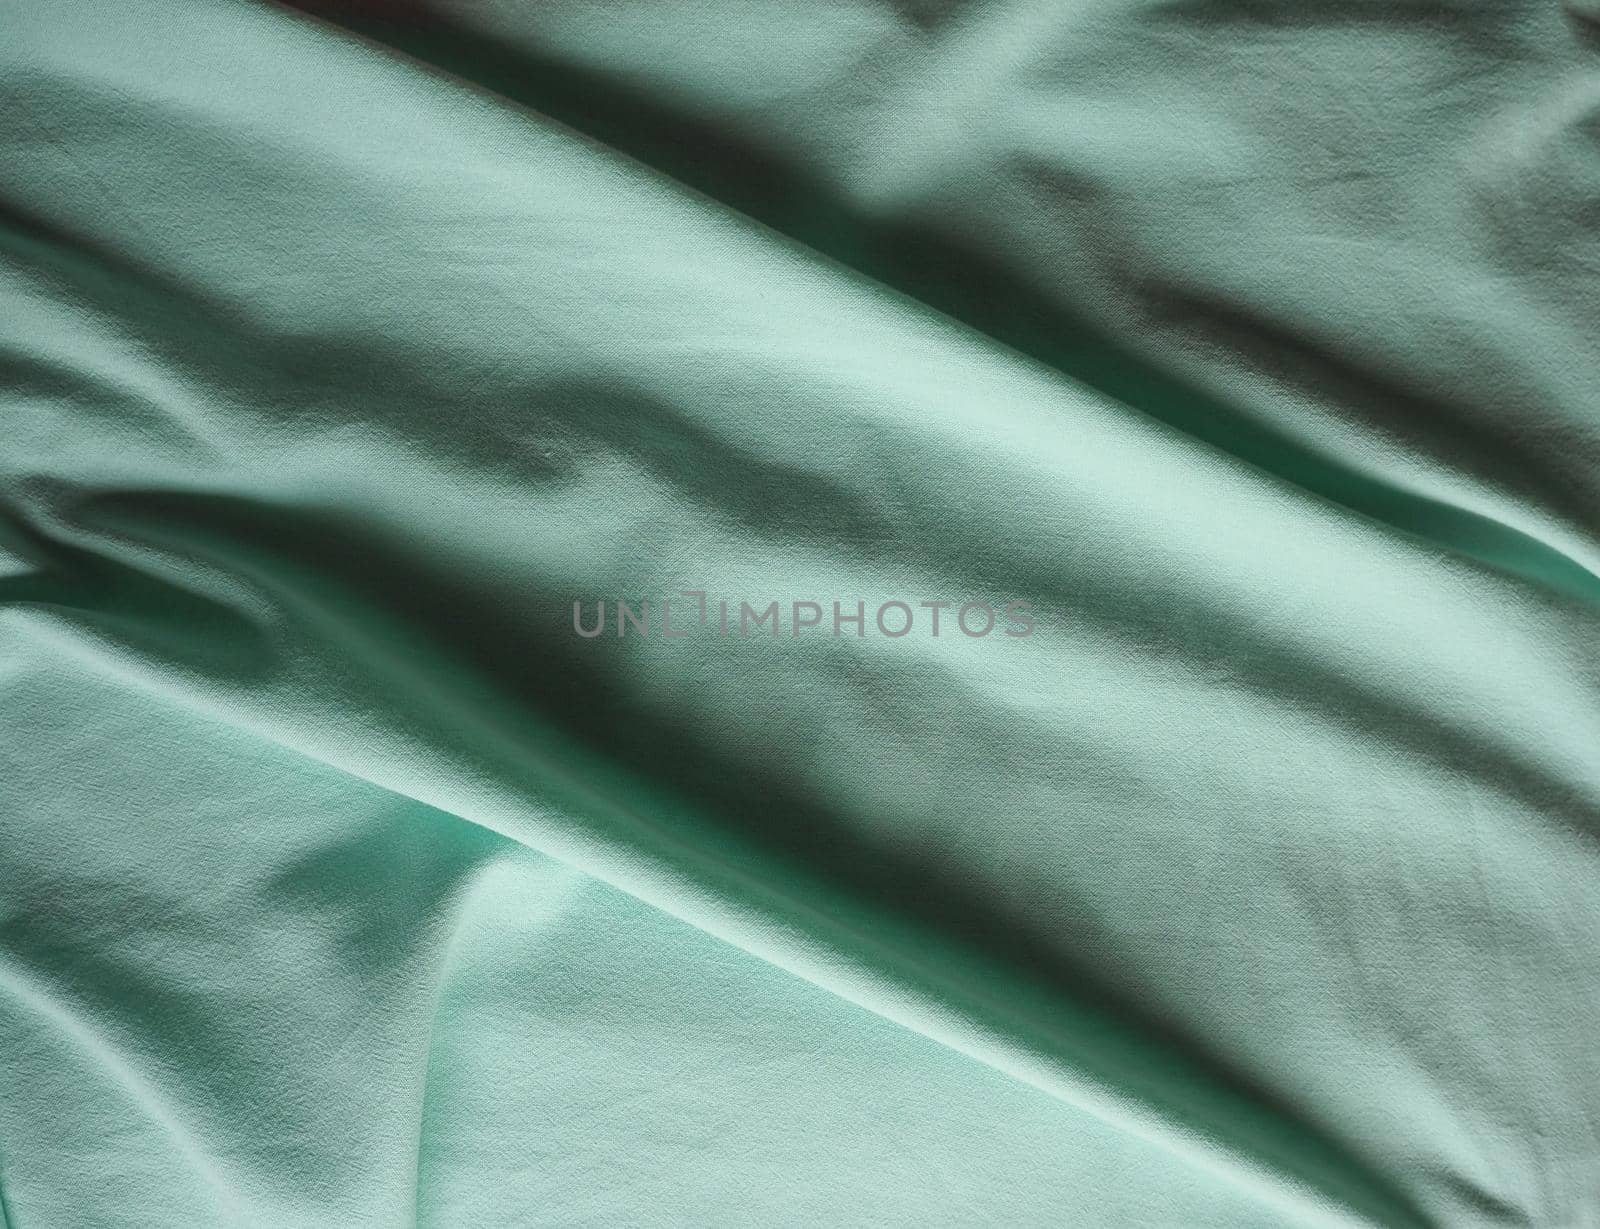 crumpled teal green fabric texture background by claudiodivizia